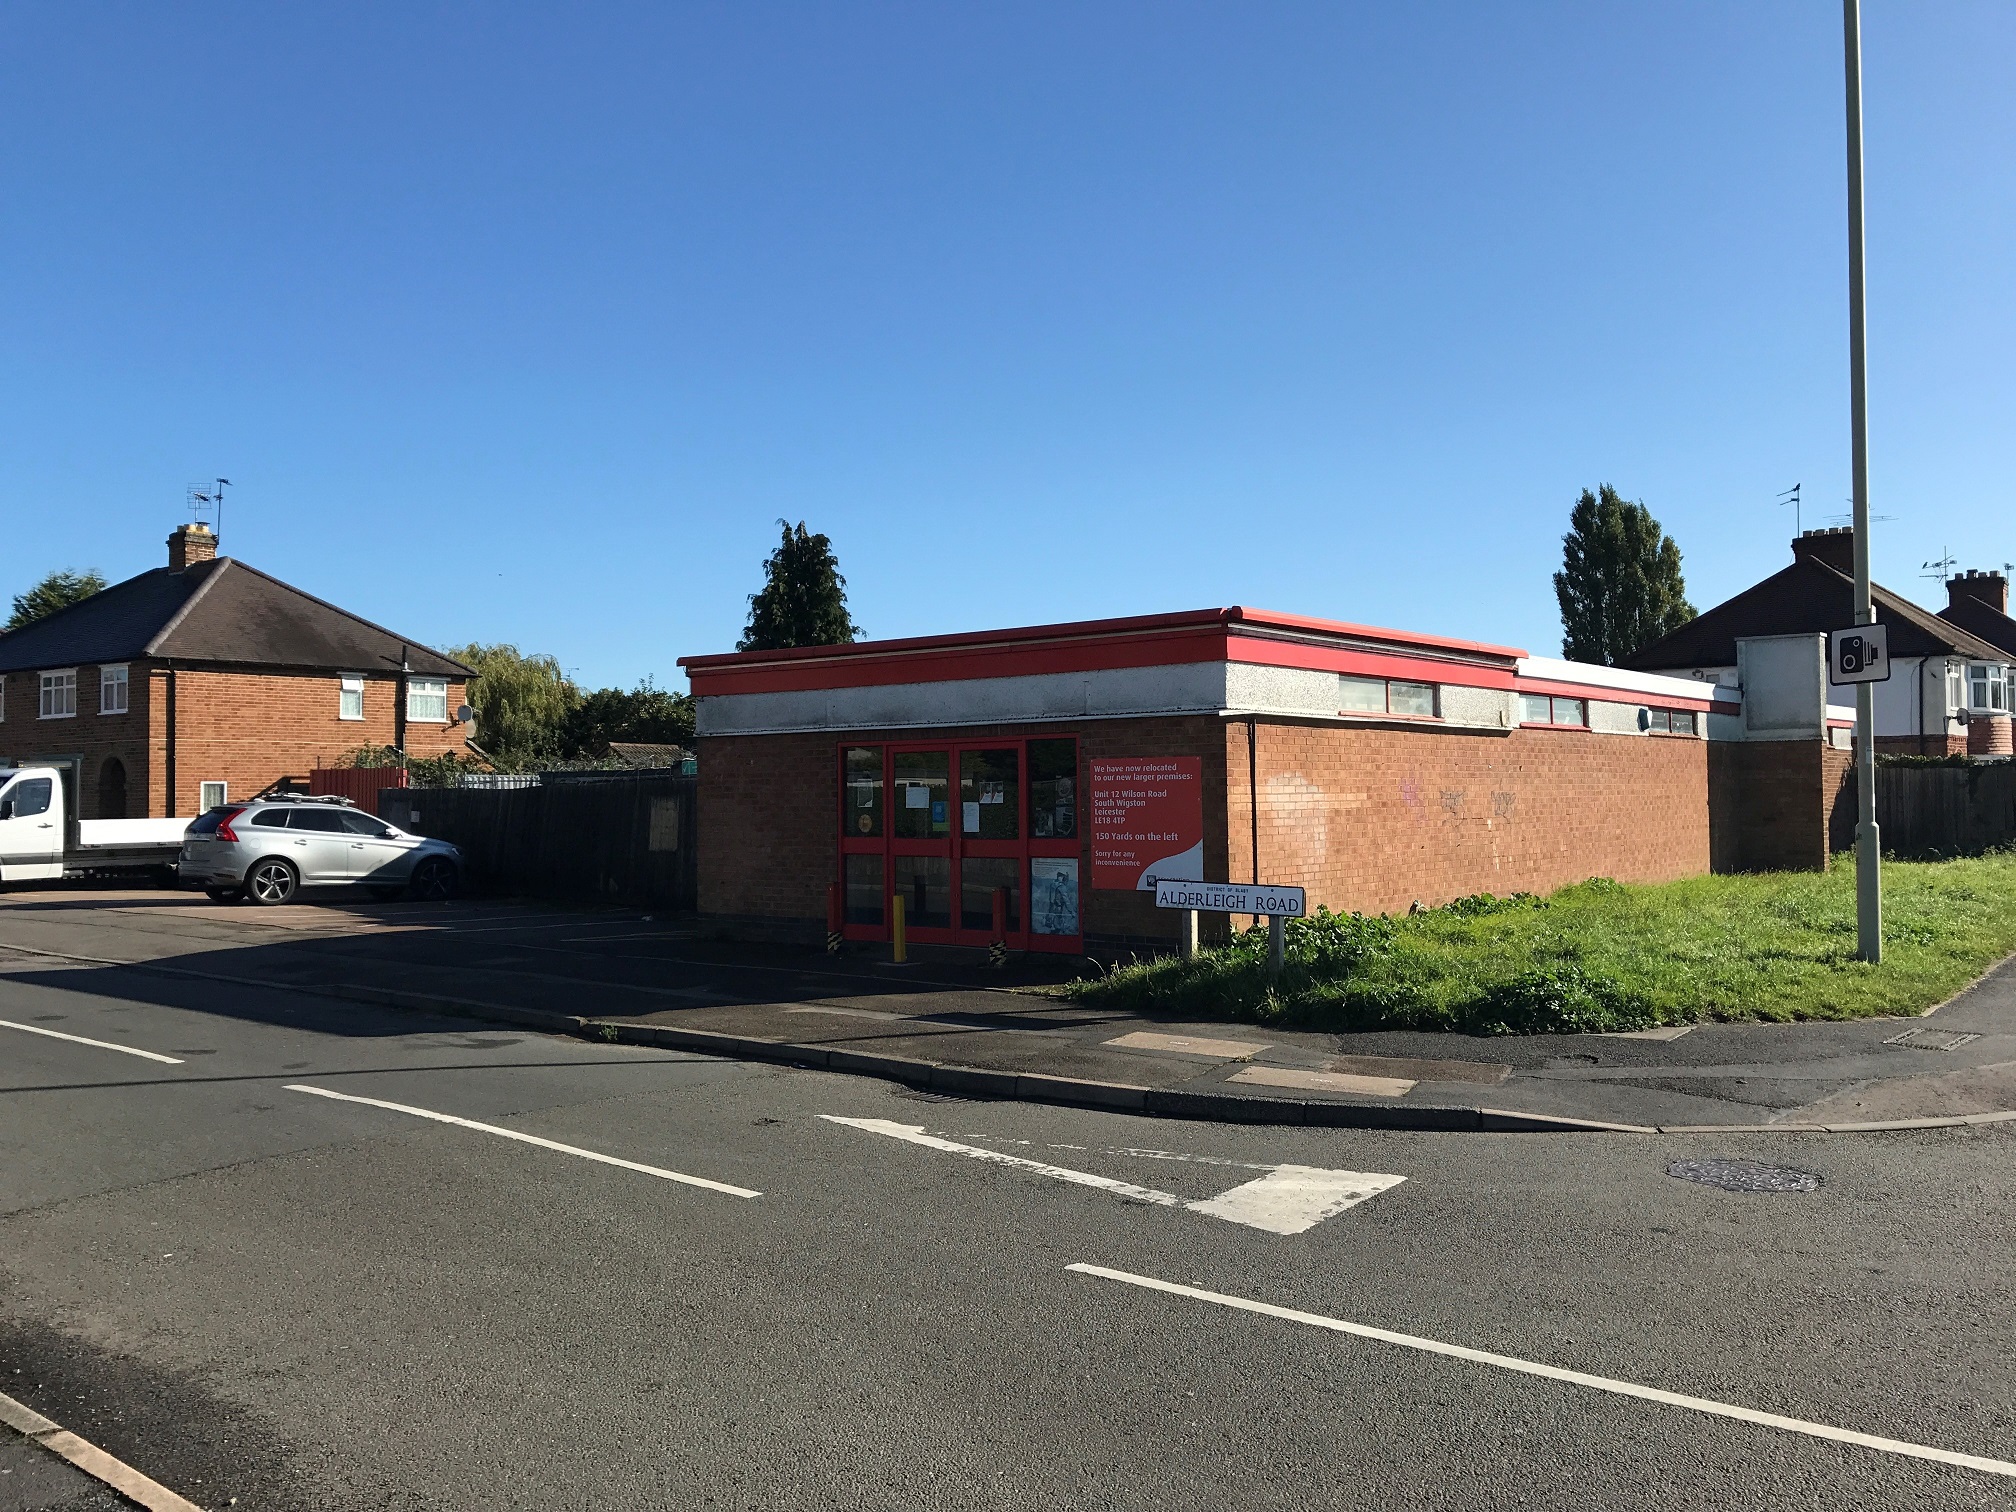 Former hire premises in Glen Parva attracts great deal of interest